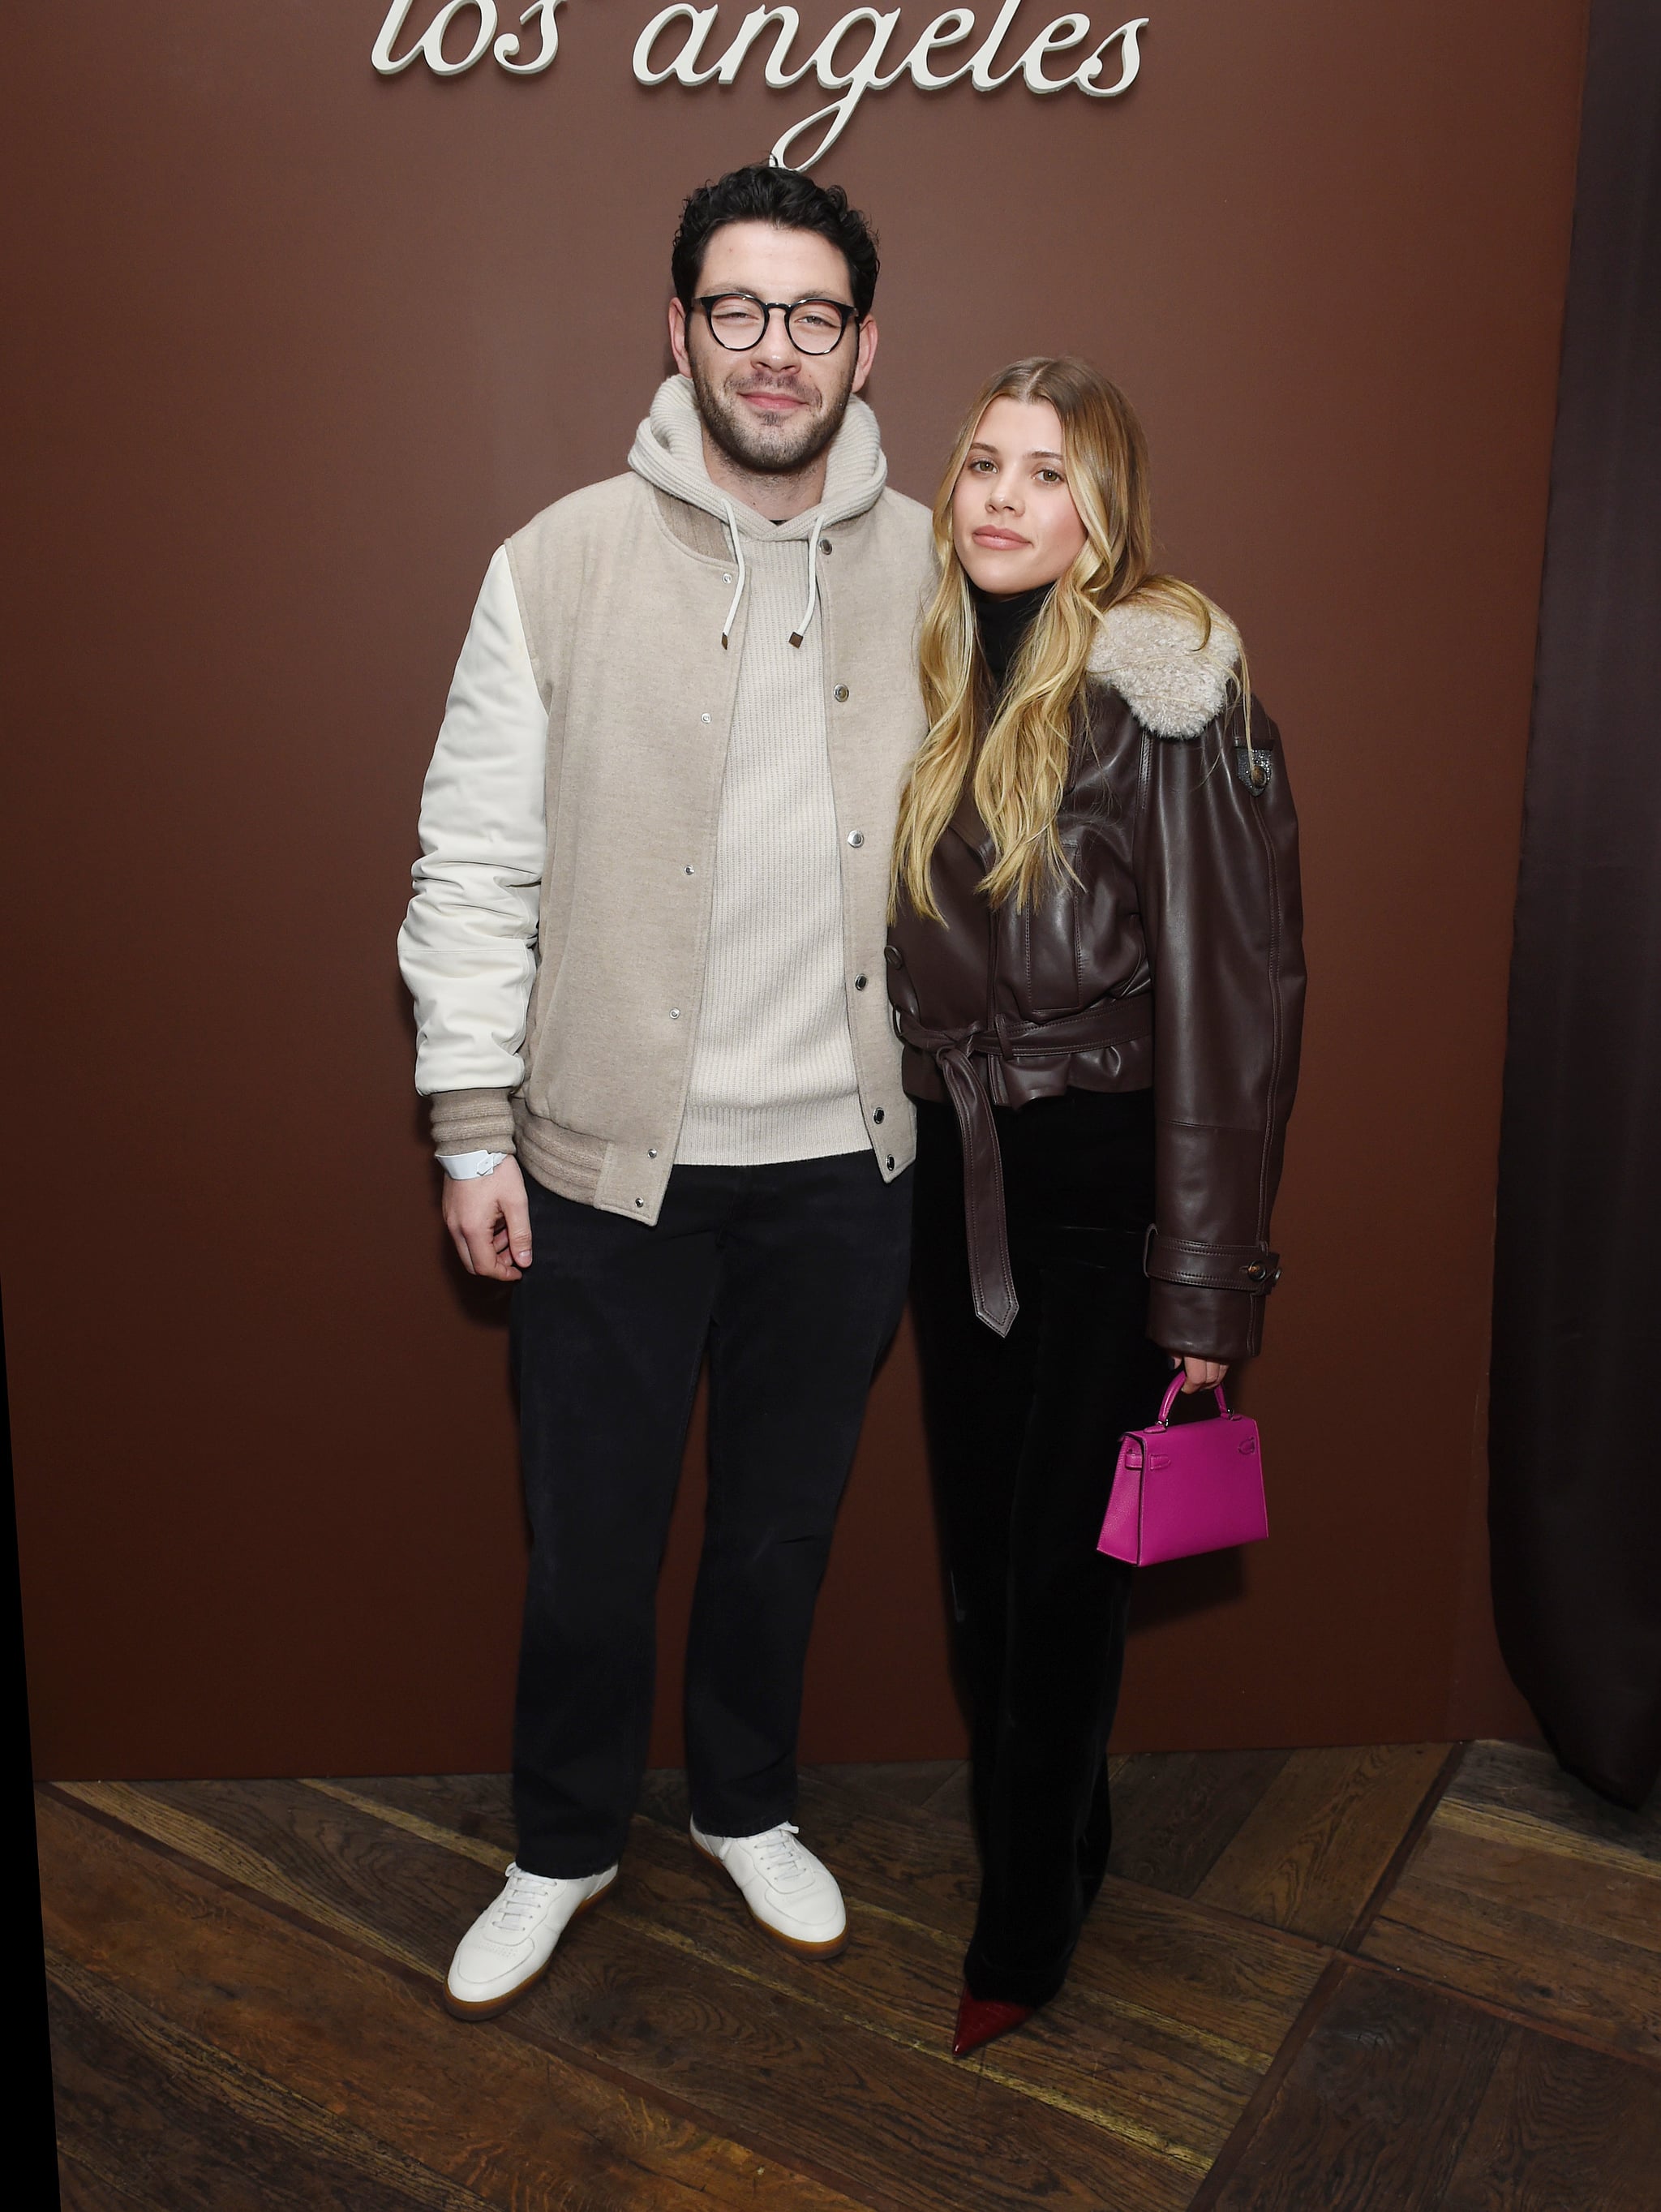 Elliot Grainge, Sofia Richie at Midnight in Los Angeles held at Delilah on January 11, 2023 in West Hollywood, California. (Photo by Gilbert Flores/WWD via Getty Images)